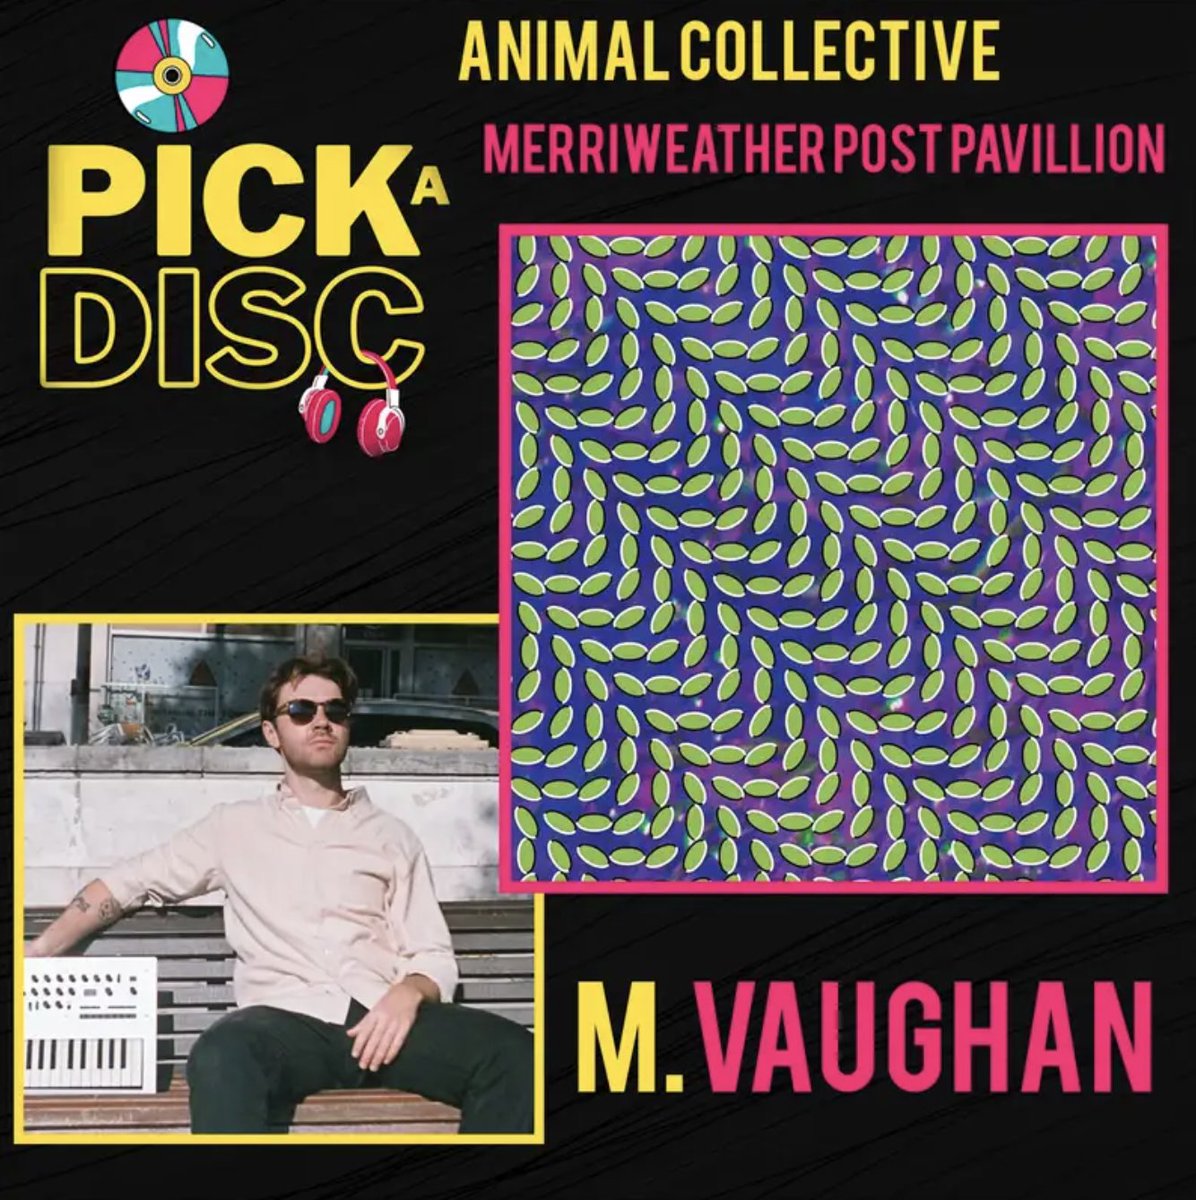 M. Vaughan was the guest on the latest @pickadisc podcast, going in-depth on his love for Animal Collective's 'Merriweather Post Pavilion' album. pickadisc.transistor.fm/episodes/merri…